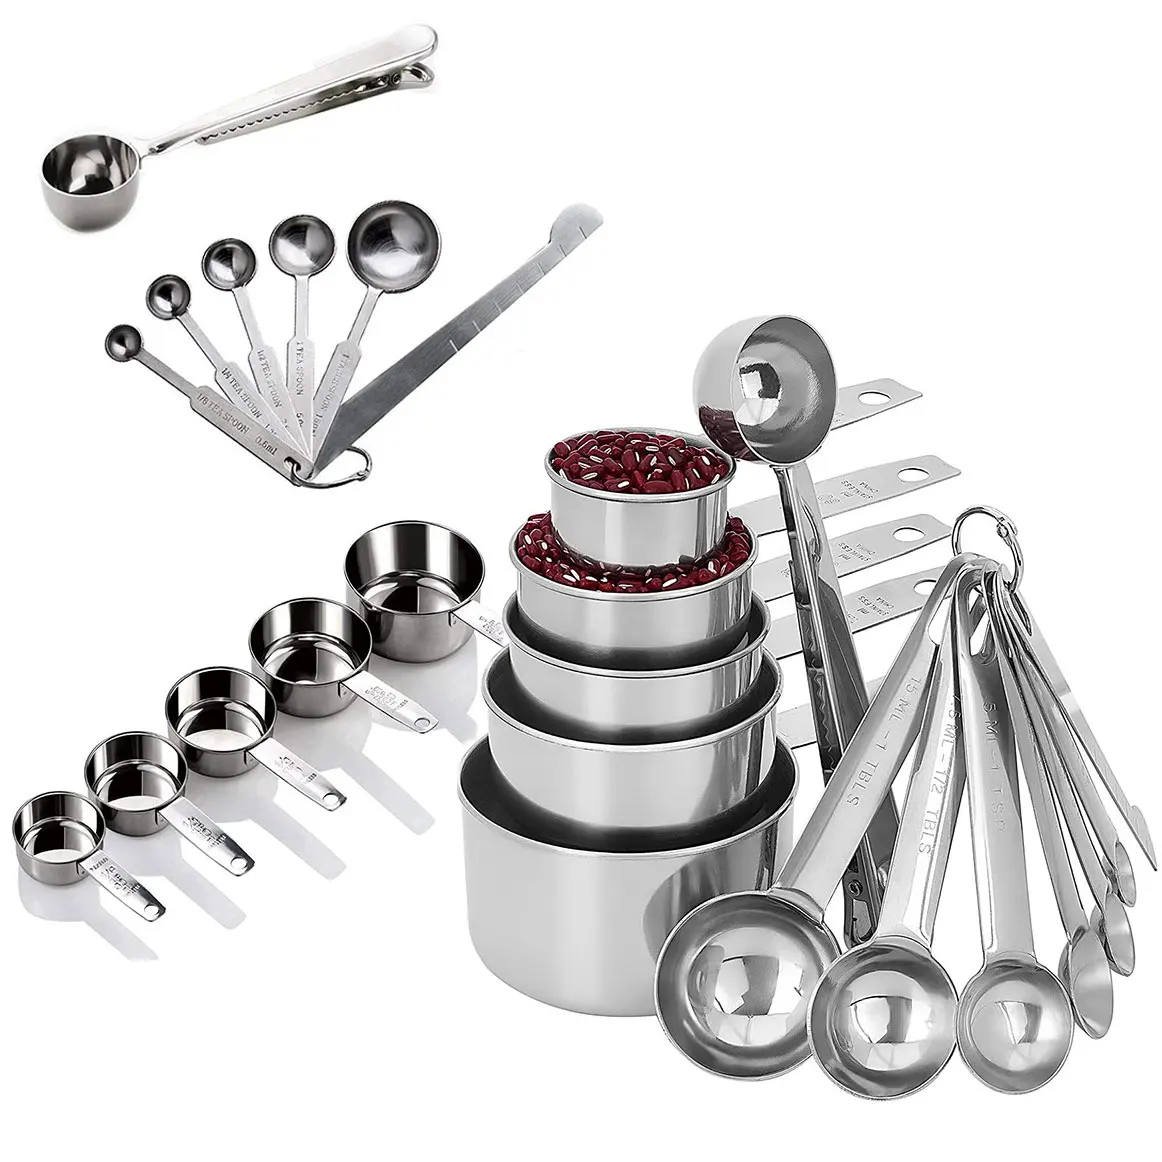 13-piece Set Stainless Steel  Measuring Cups Spoons Stackable Tablespoons Baking Cake Cooking Making Measuring with Graduated